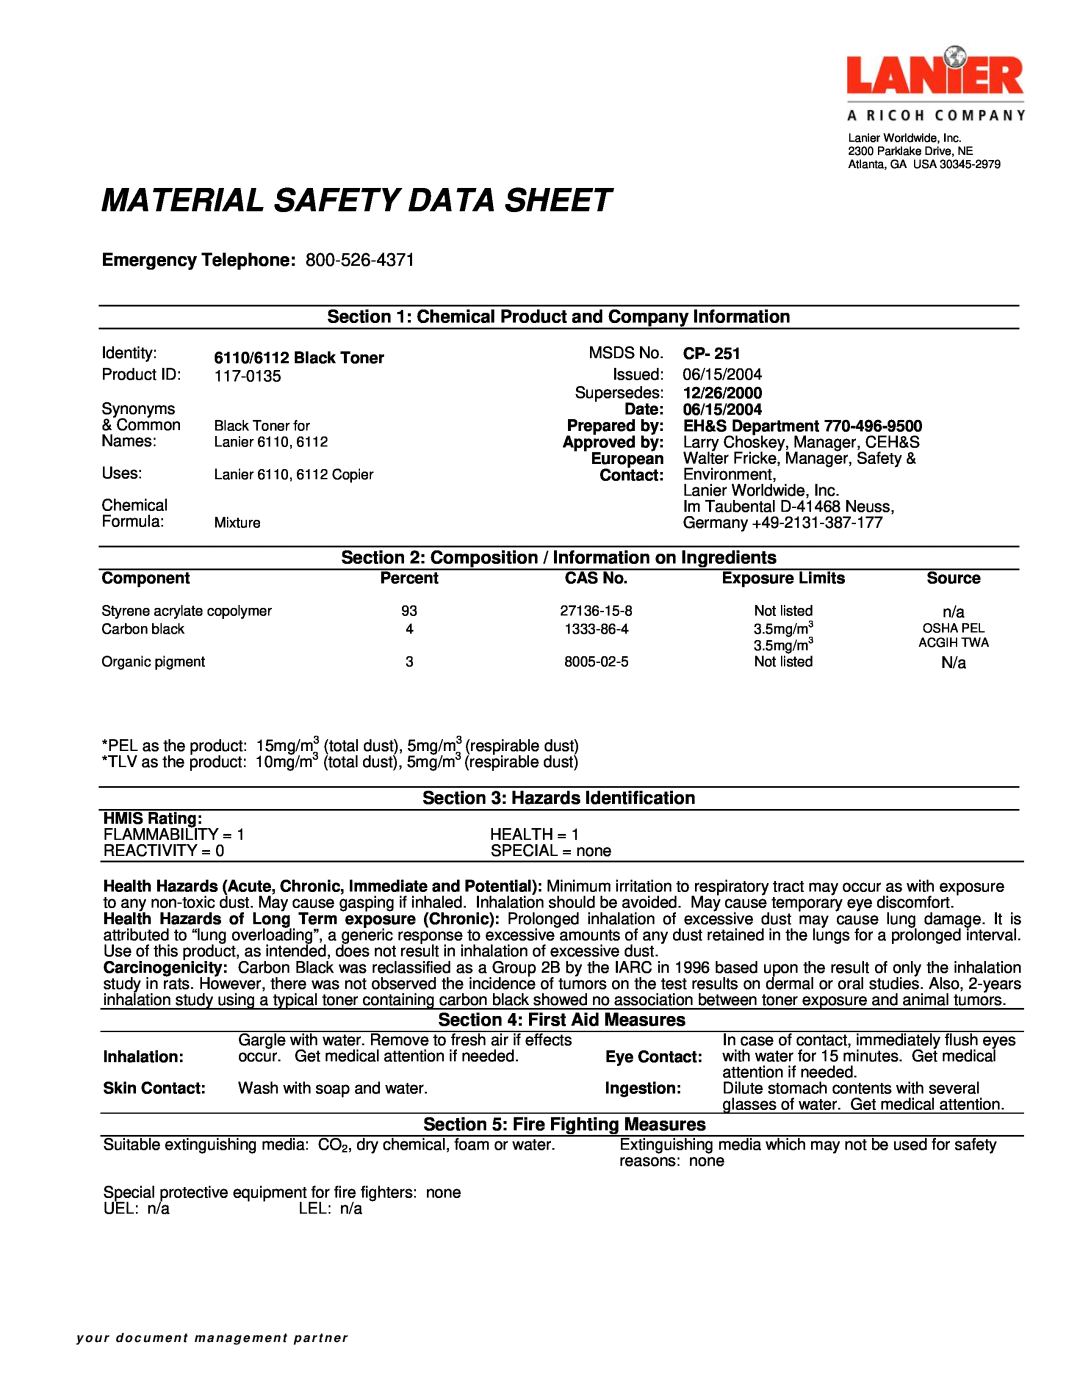 Lanier 6110, 6112 manual Material Safety Data Sheet, Emergency Telephone, Hazards Identification, First Aid Measures 